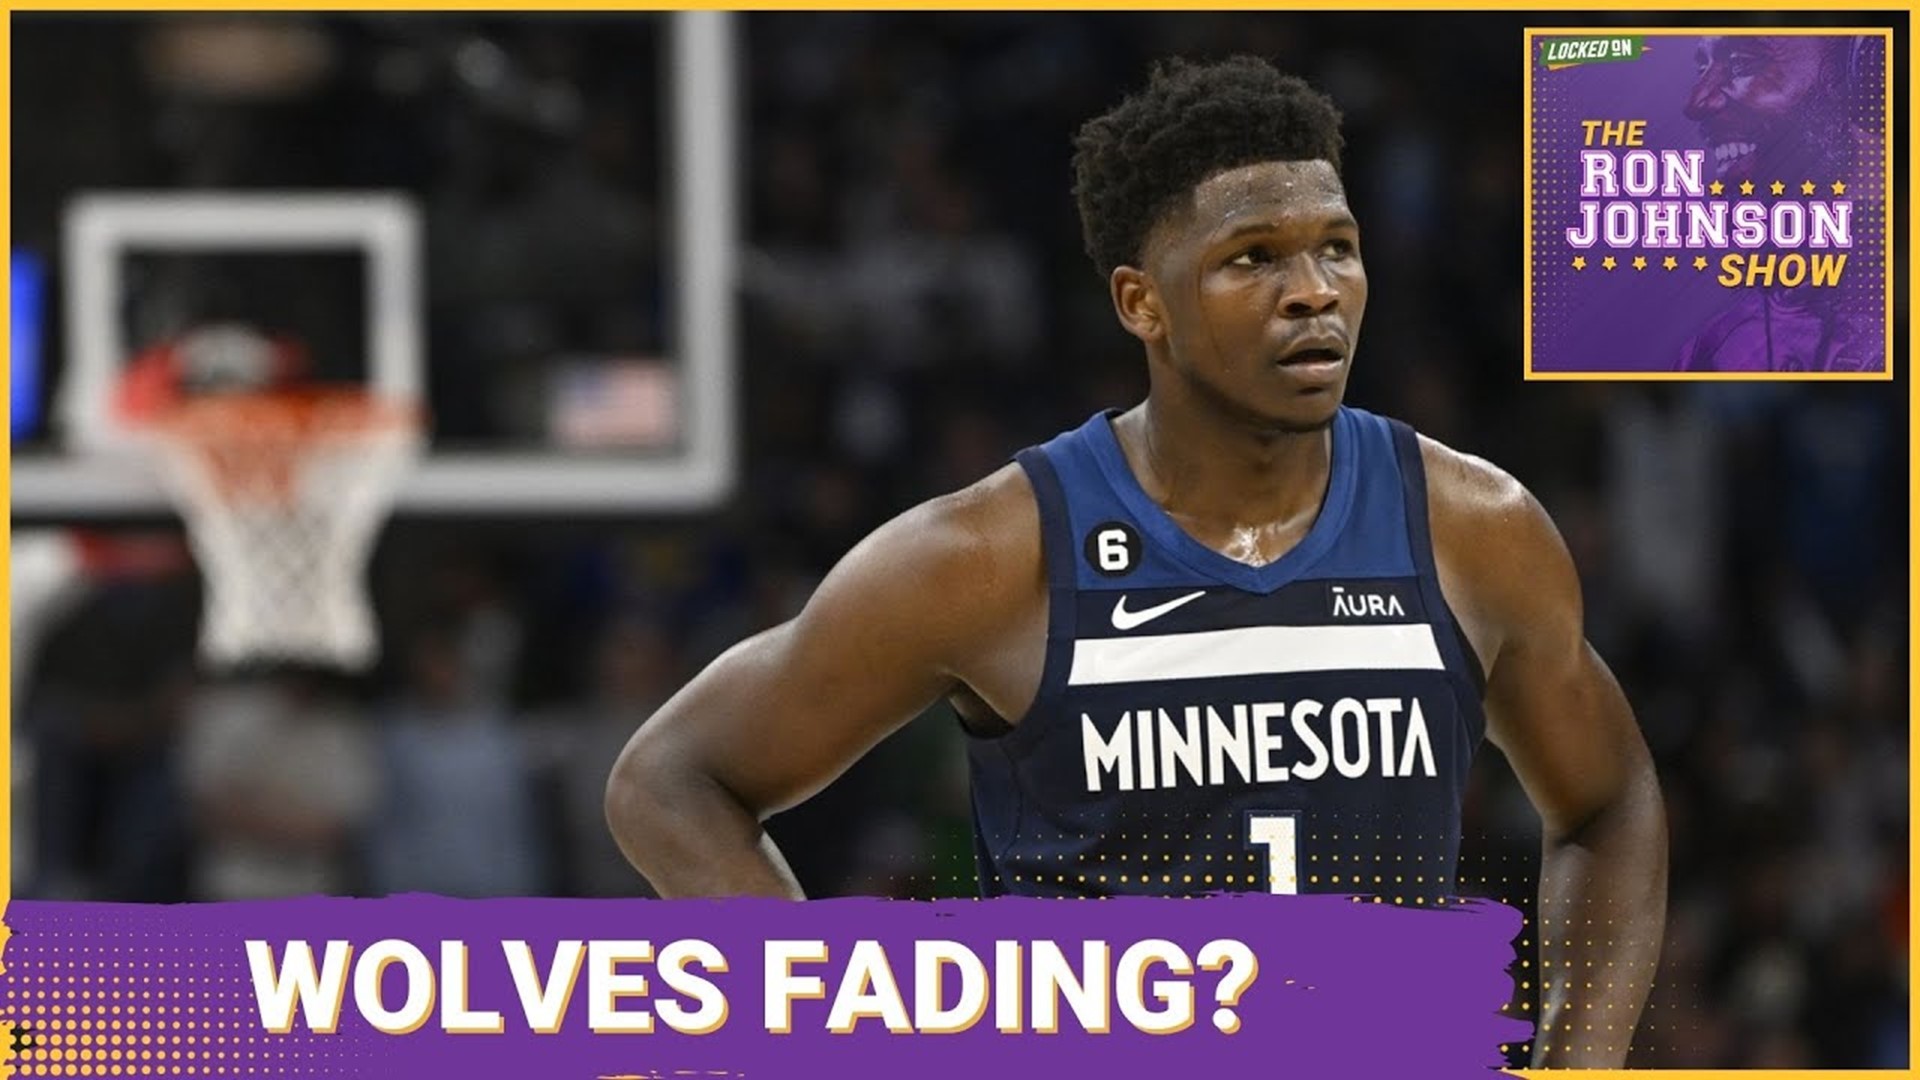 The Minnesota Timberwolves Are in Trouble Without Anthony Edwards. The Ron Johnson Show